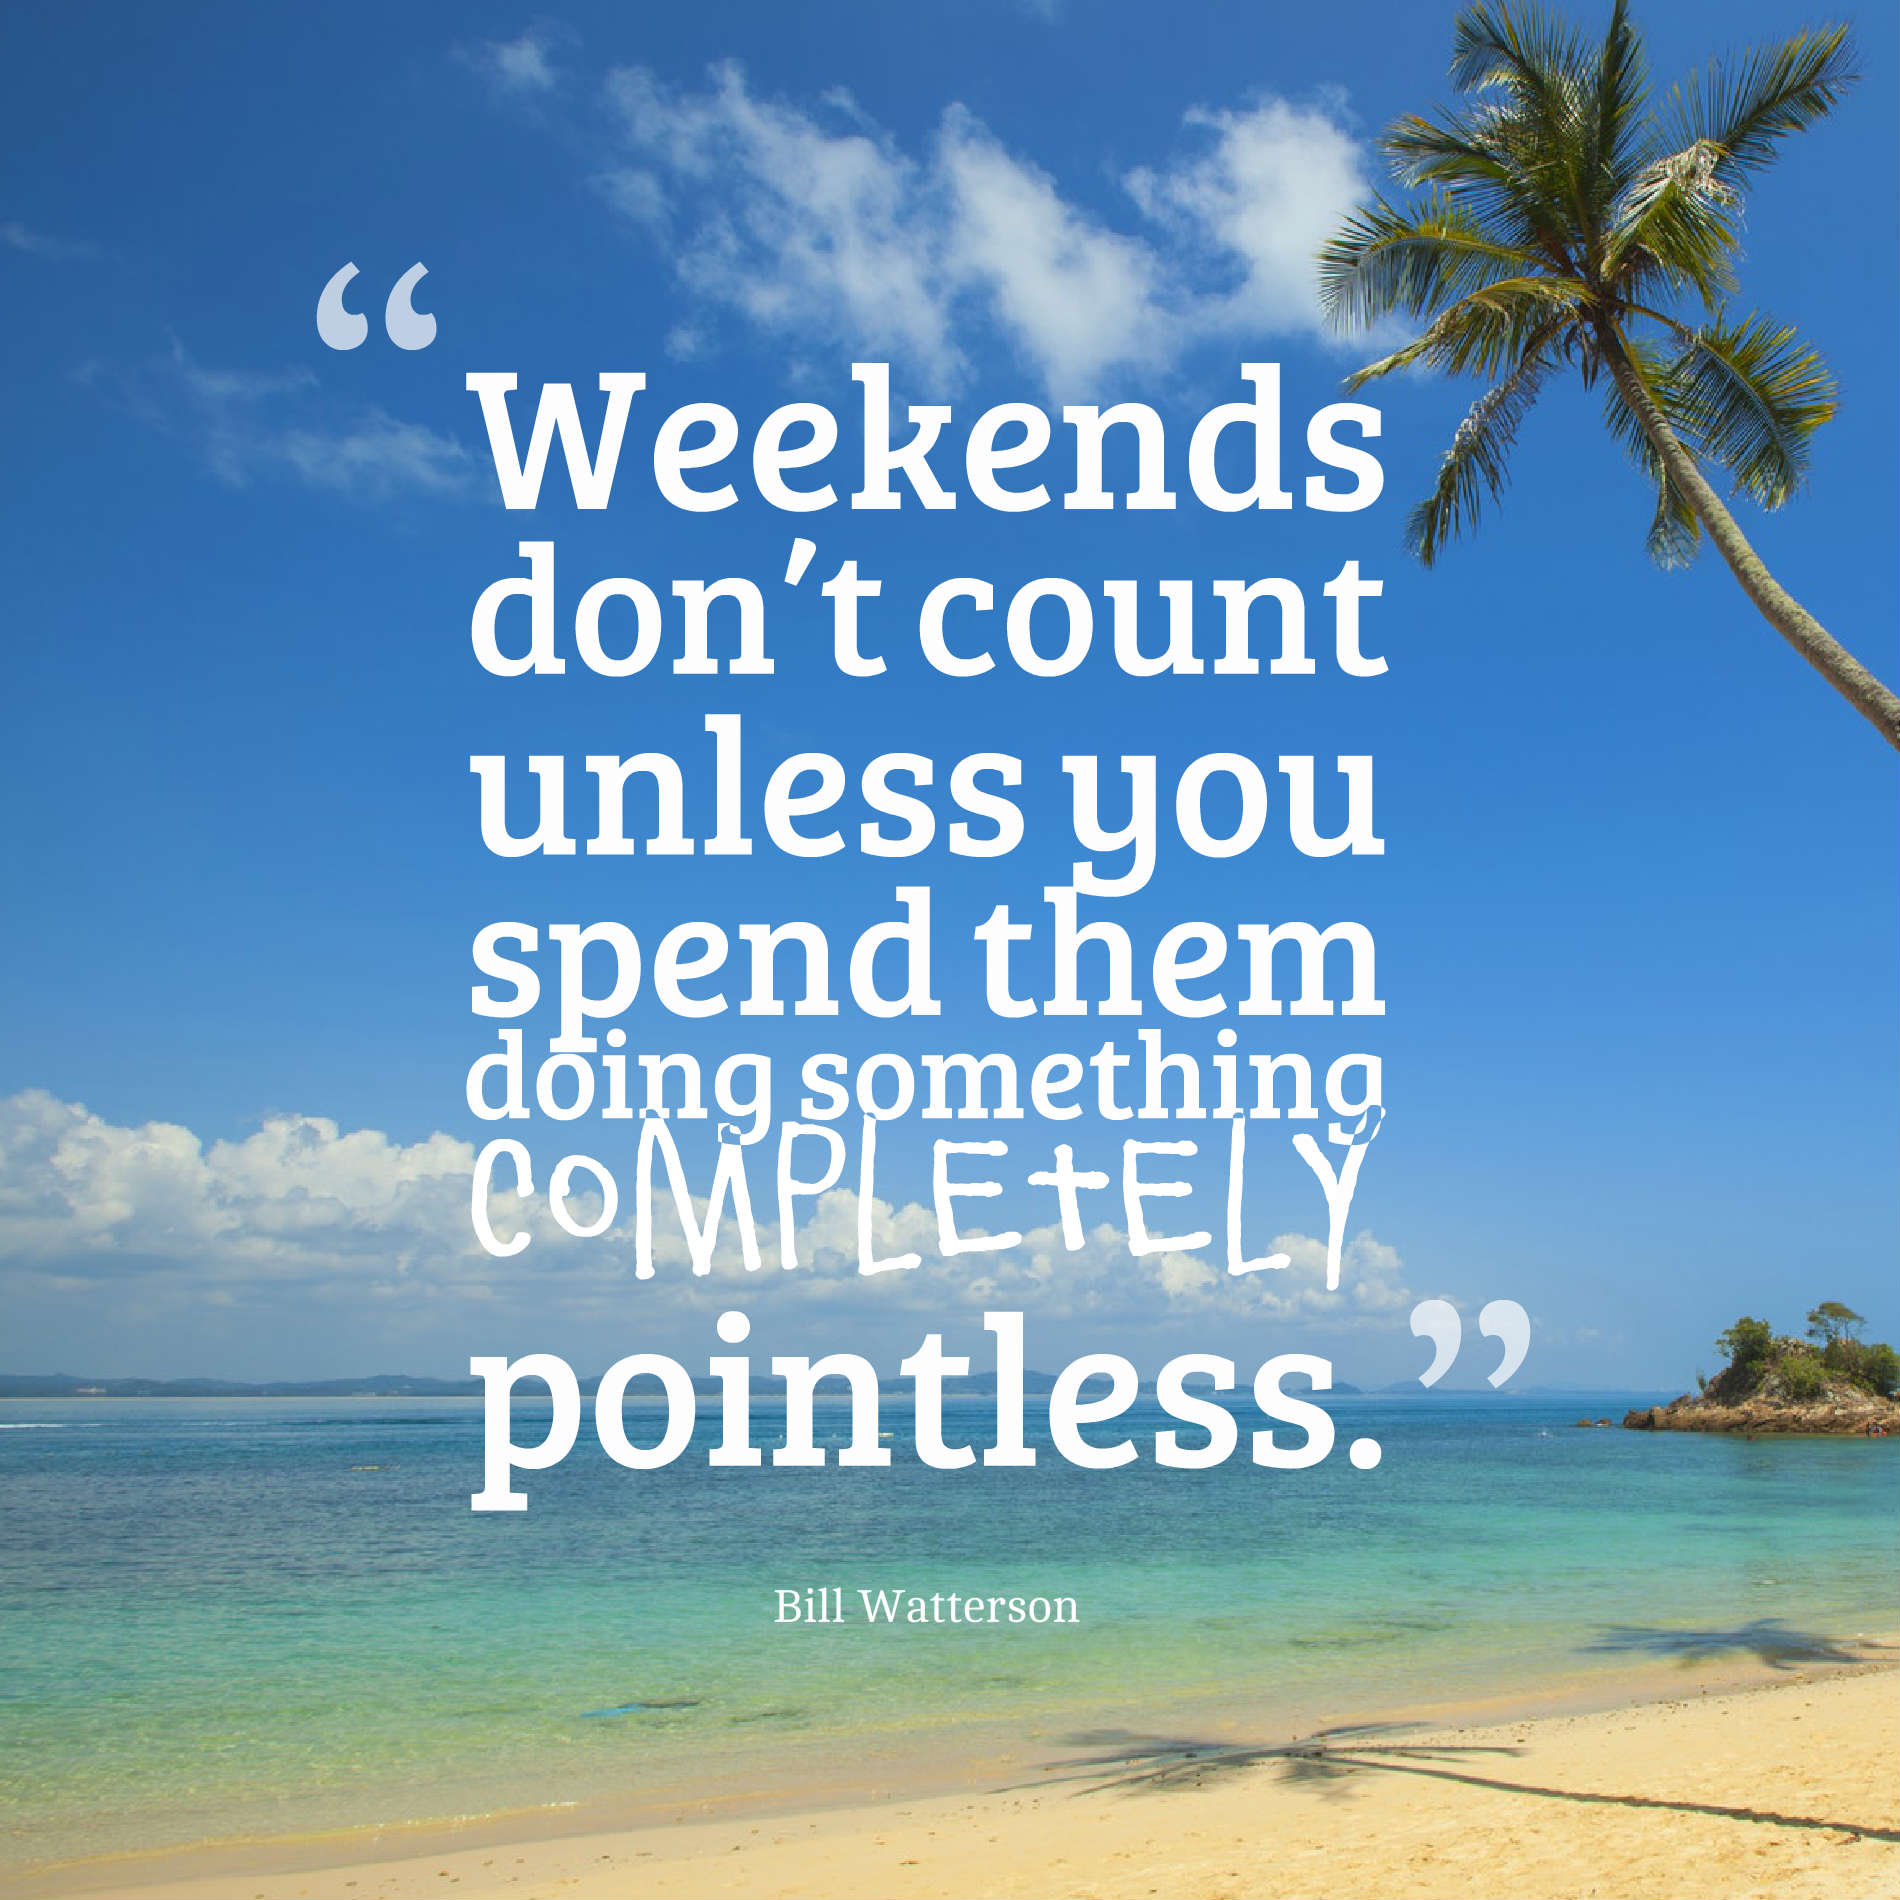 Weekends don’t count unless you spend them doing something completely pointless.